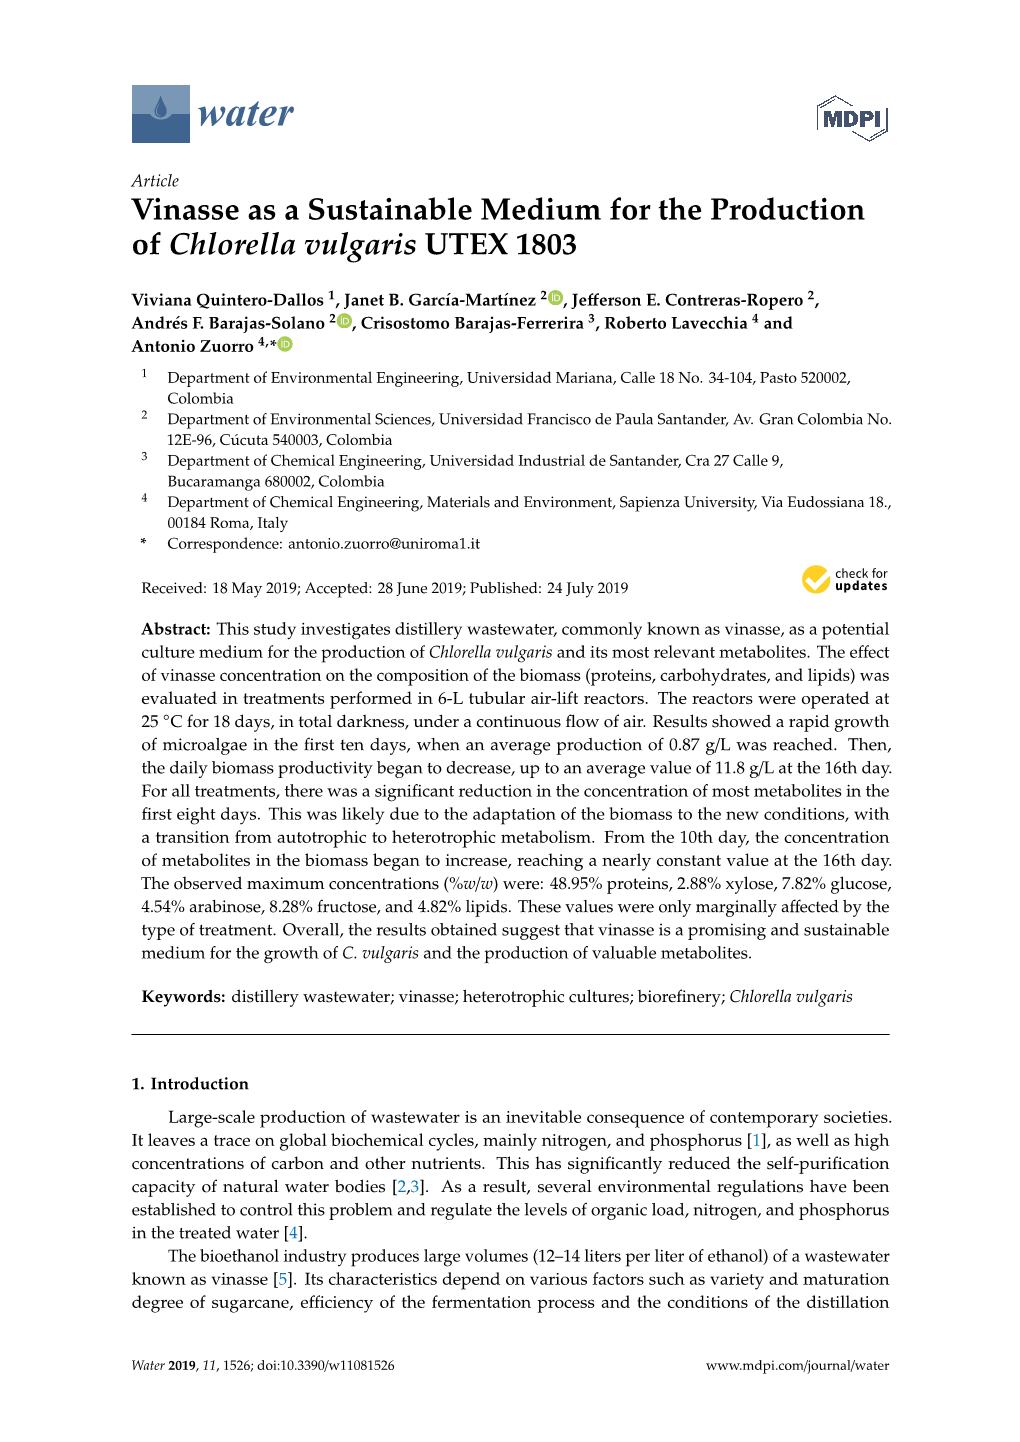 Vinasse As a Sustainable Medium for the Production of Chlorella Vulgaris UTEX 1803